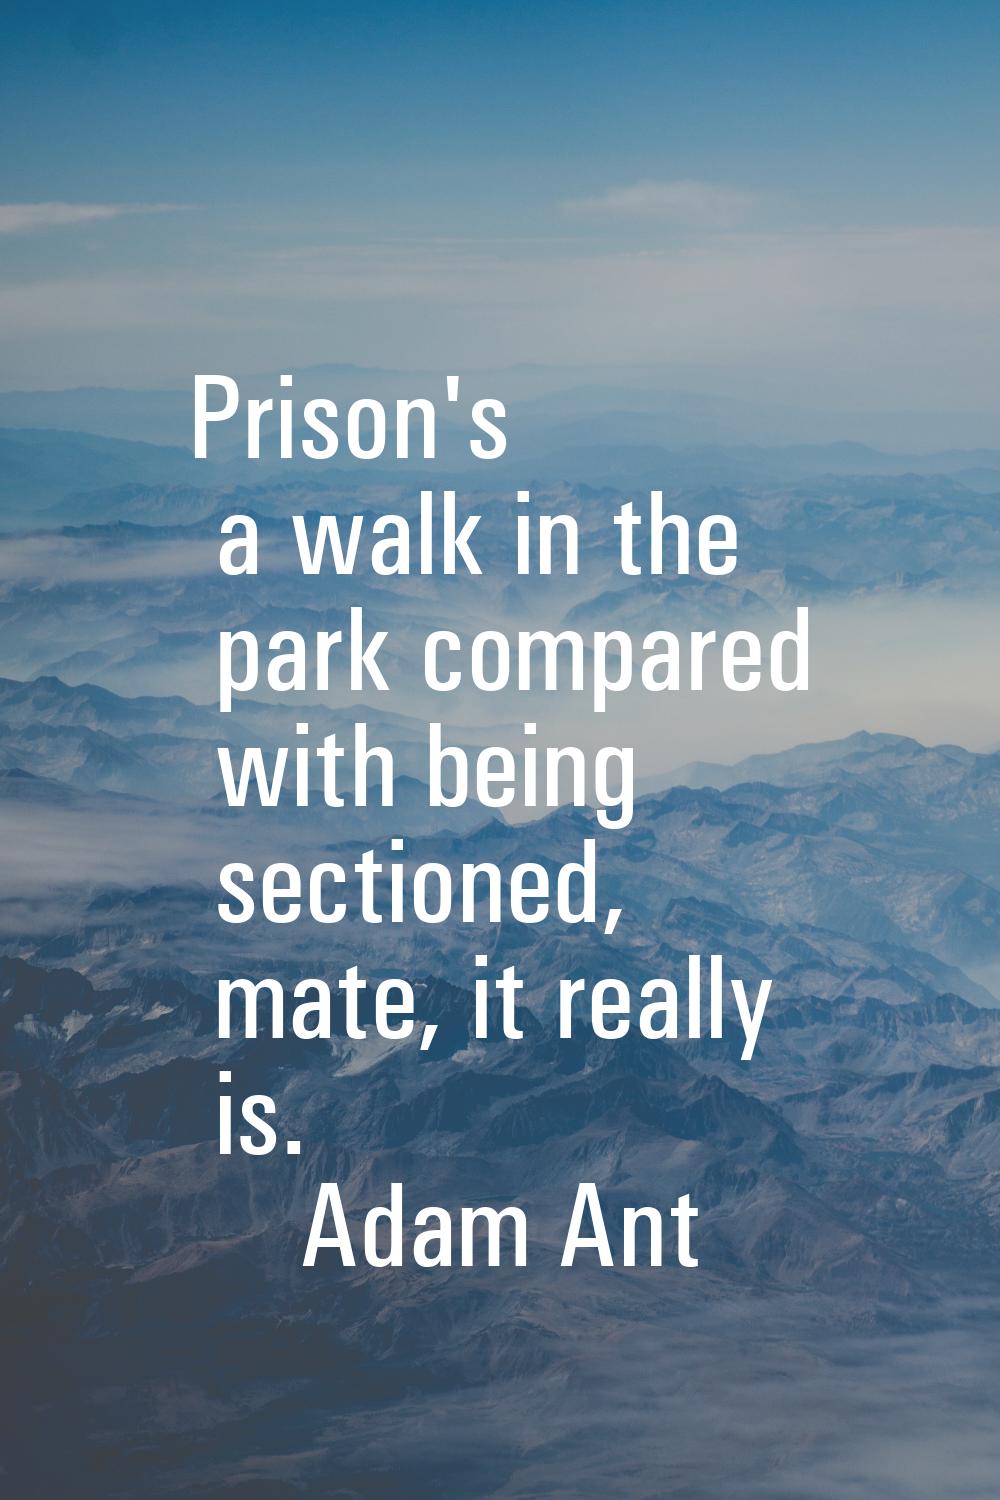 Prison's a walk in the park compared with being sectioned, mate, it really is.